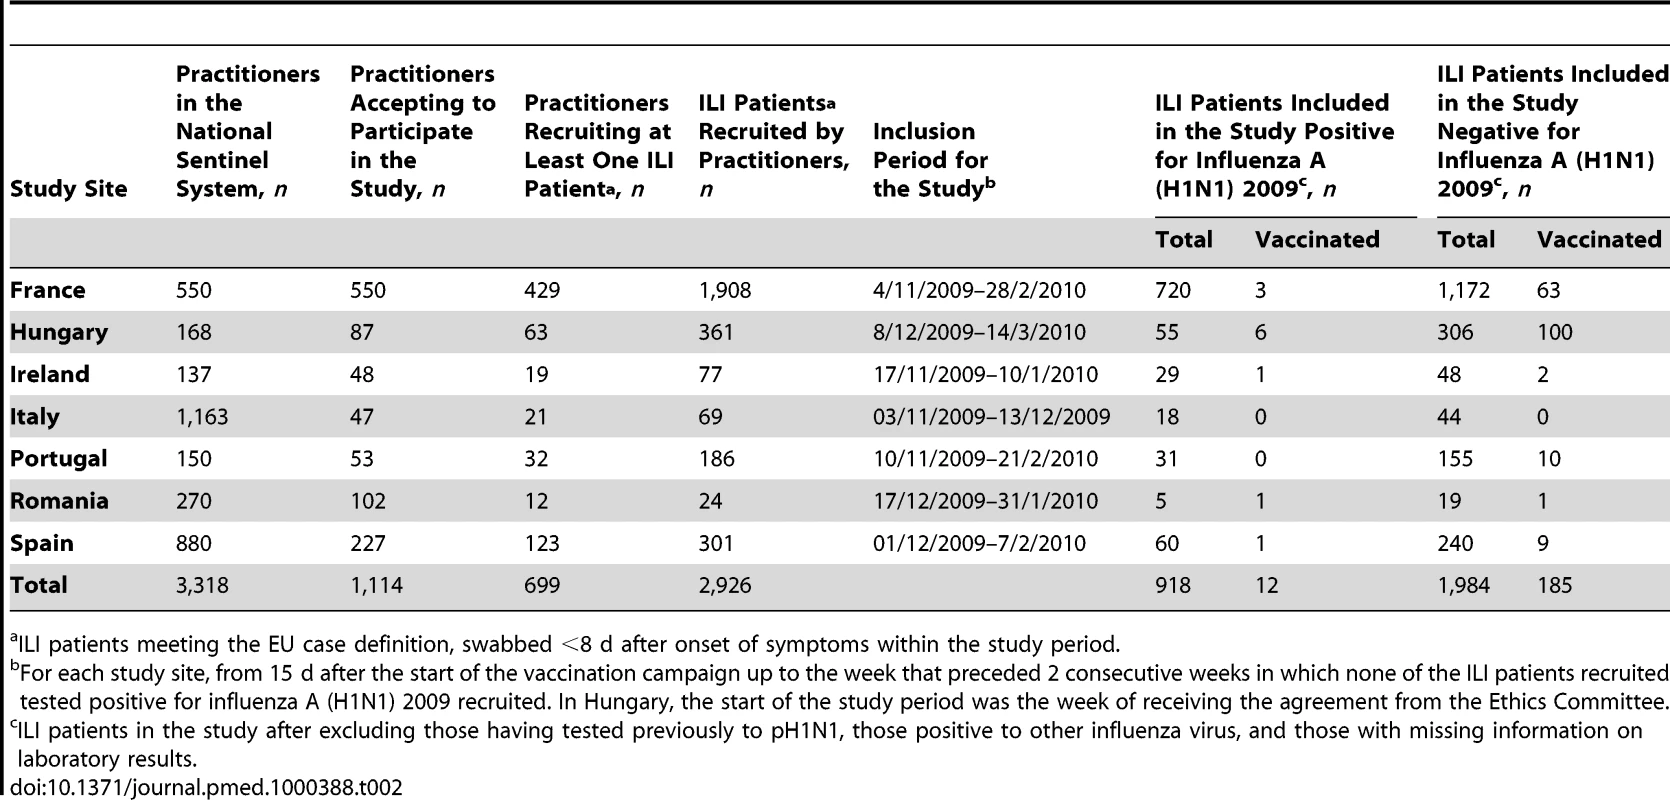 Practitioners and patient recruitment in the 2009–2010 influenza season relevant to the I-MOVE study.